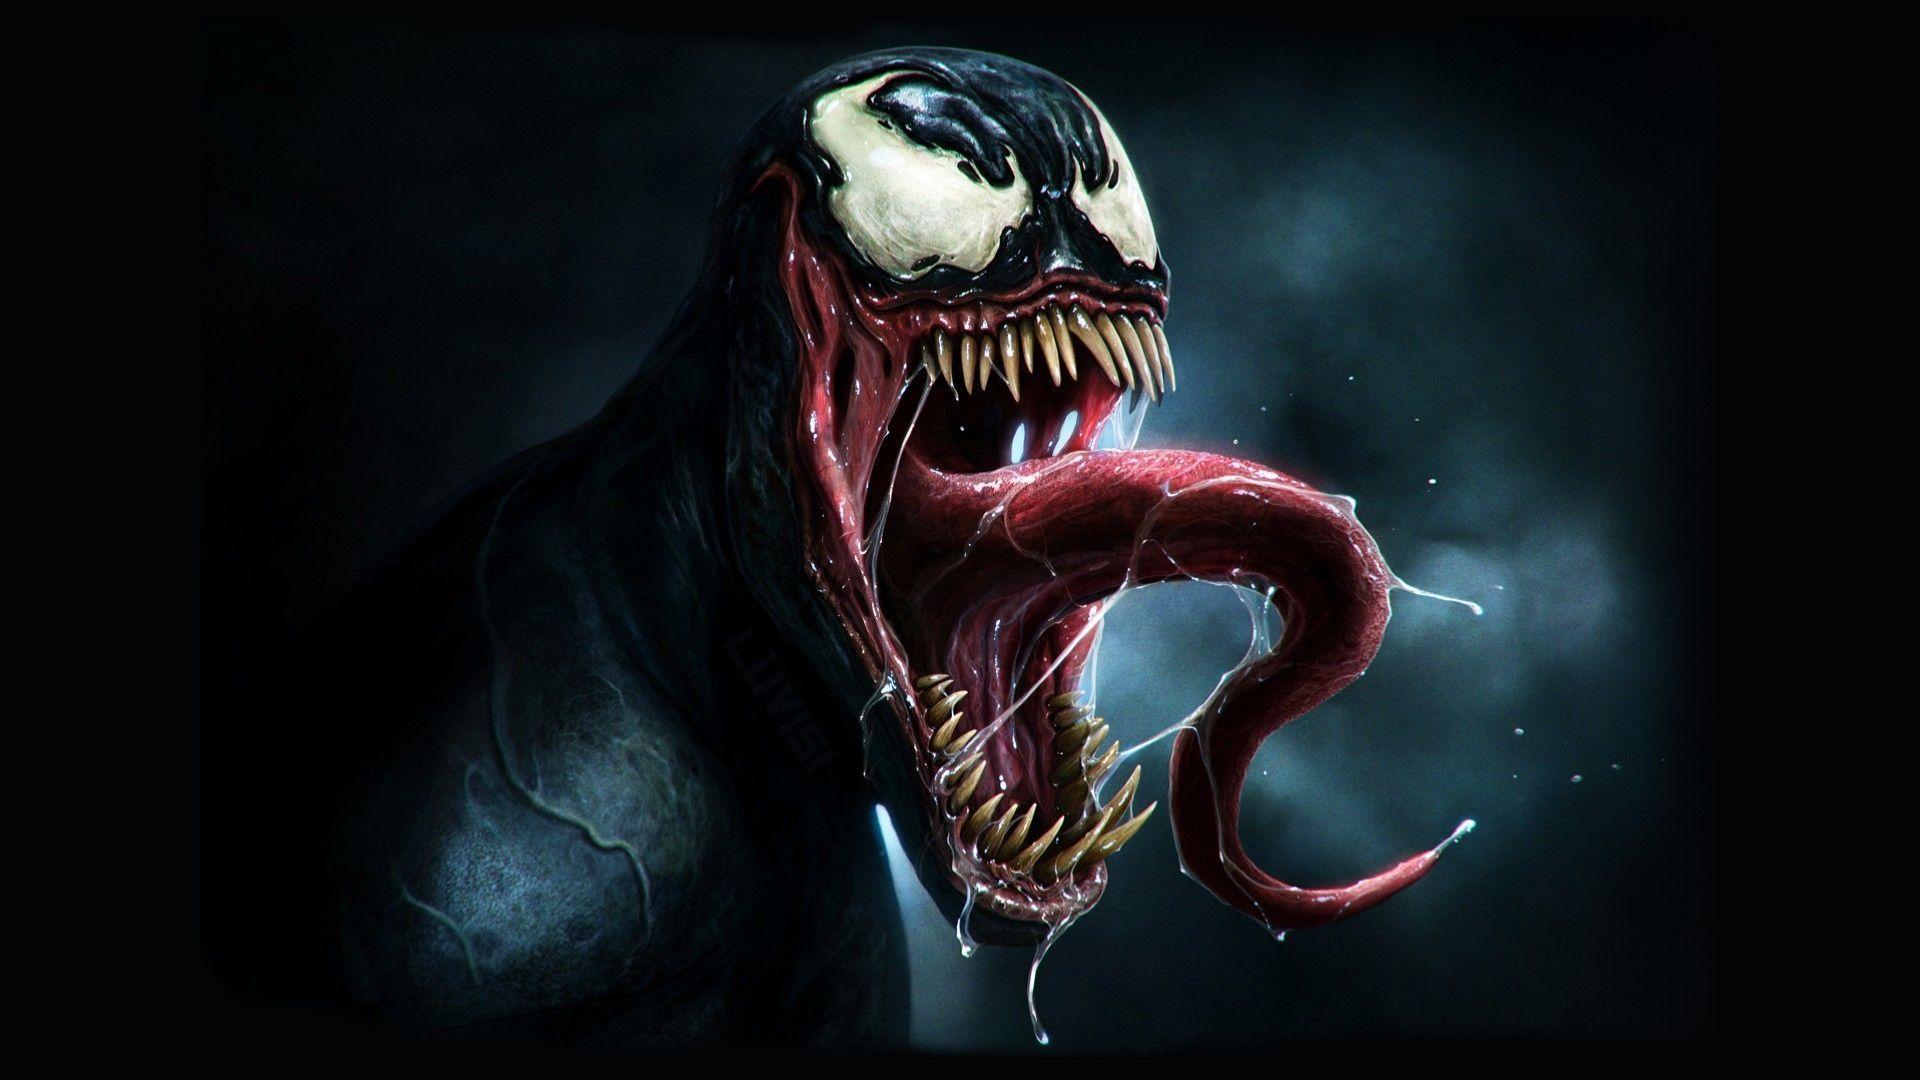 Spiderman Venom Wallpaper For Android #kAN. Awesomeness